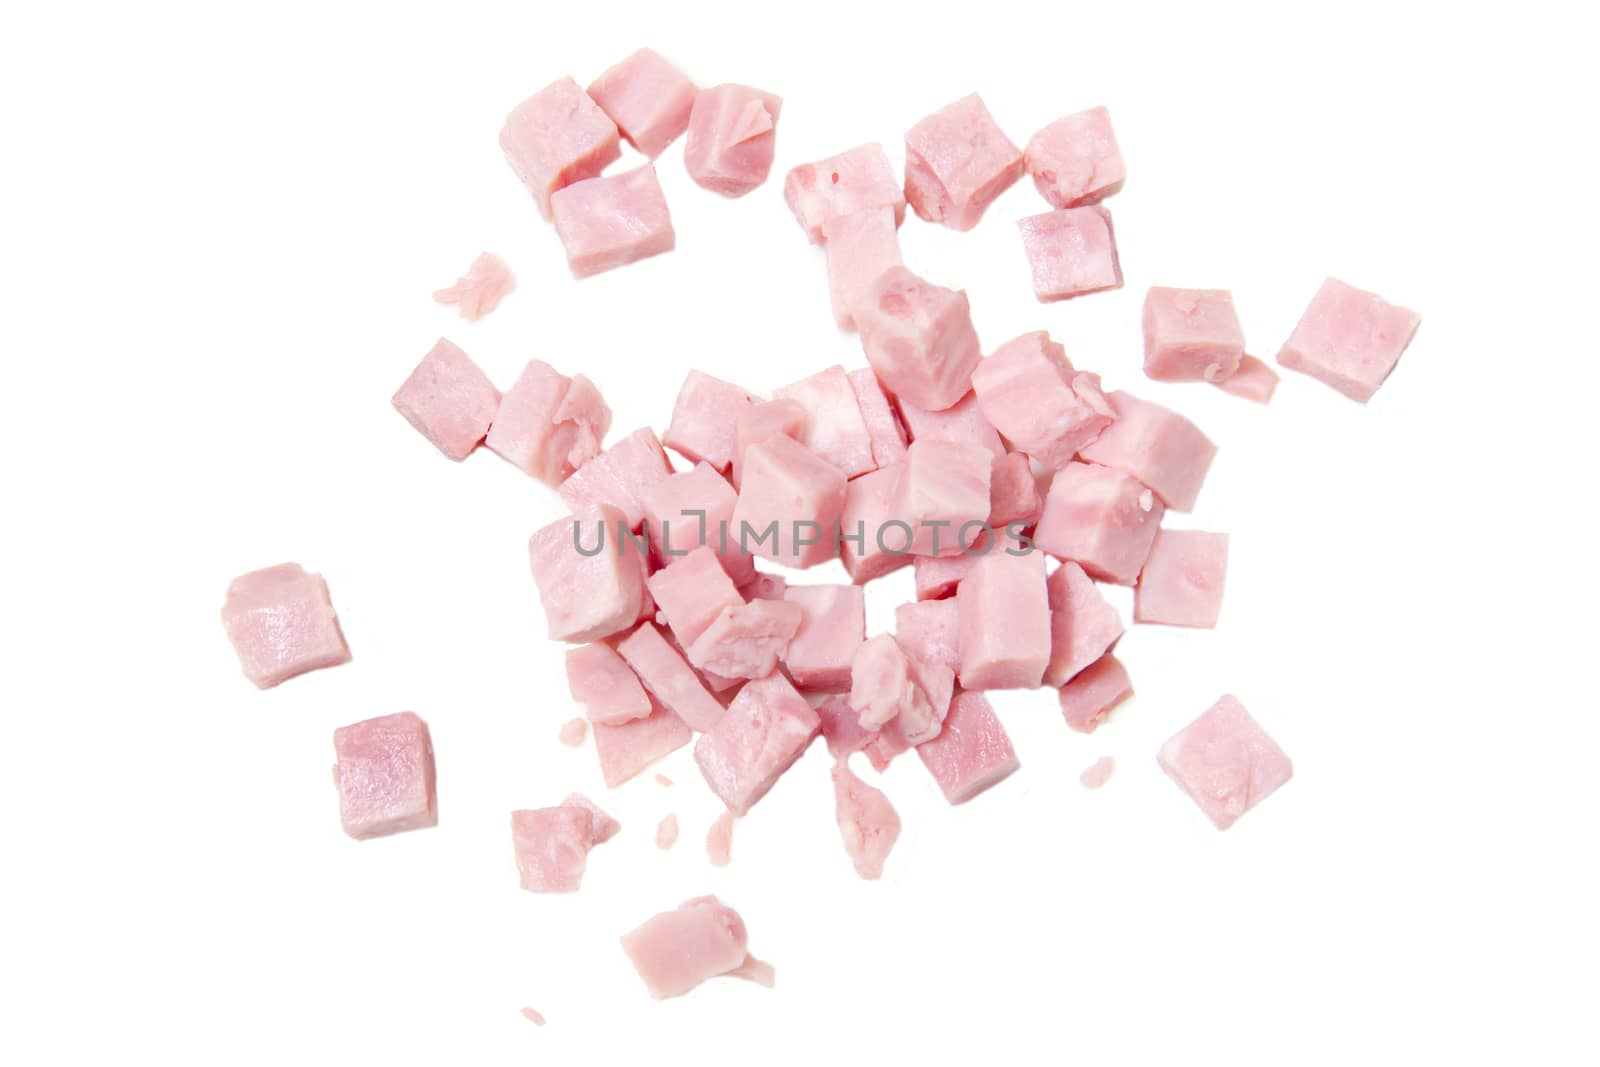 Ham cubes on a white background seen from above